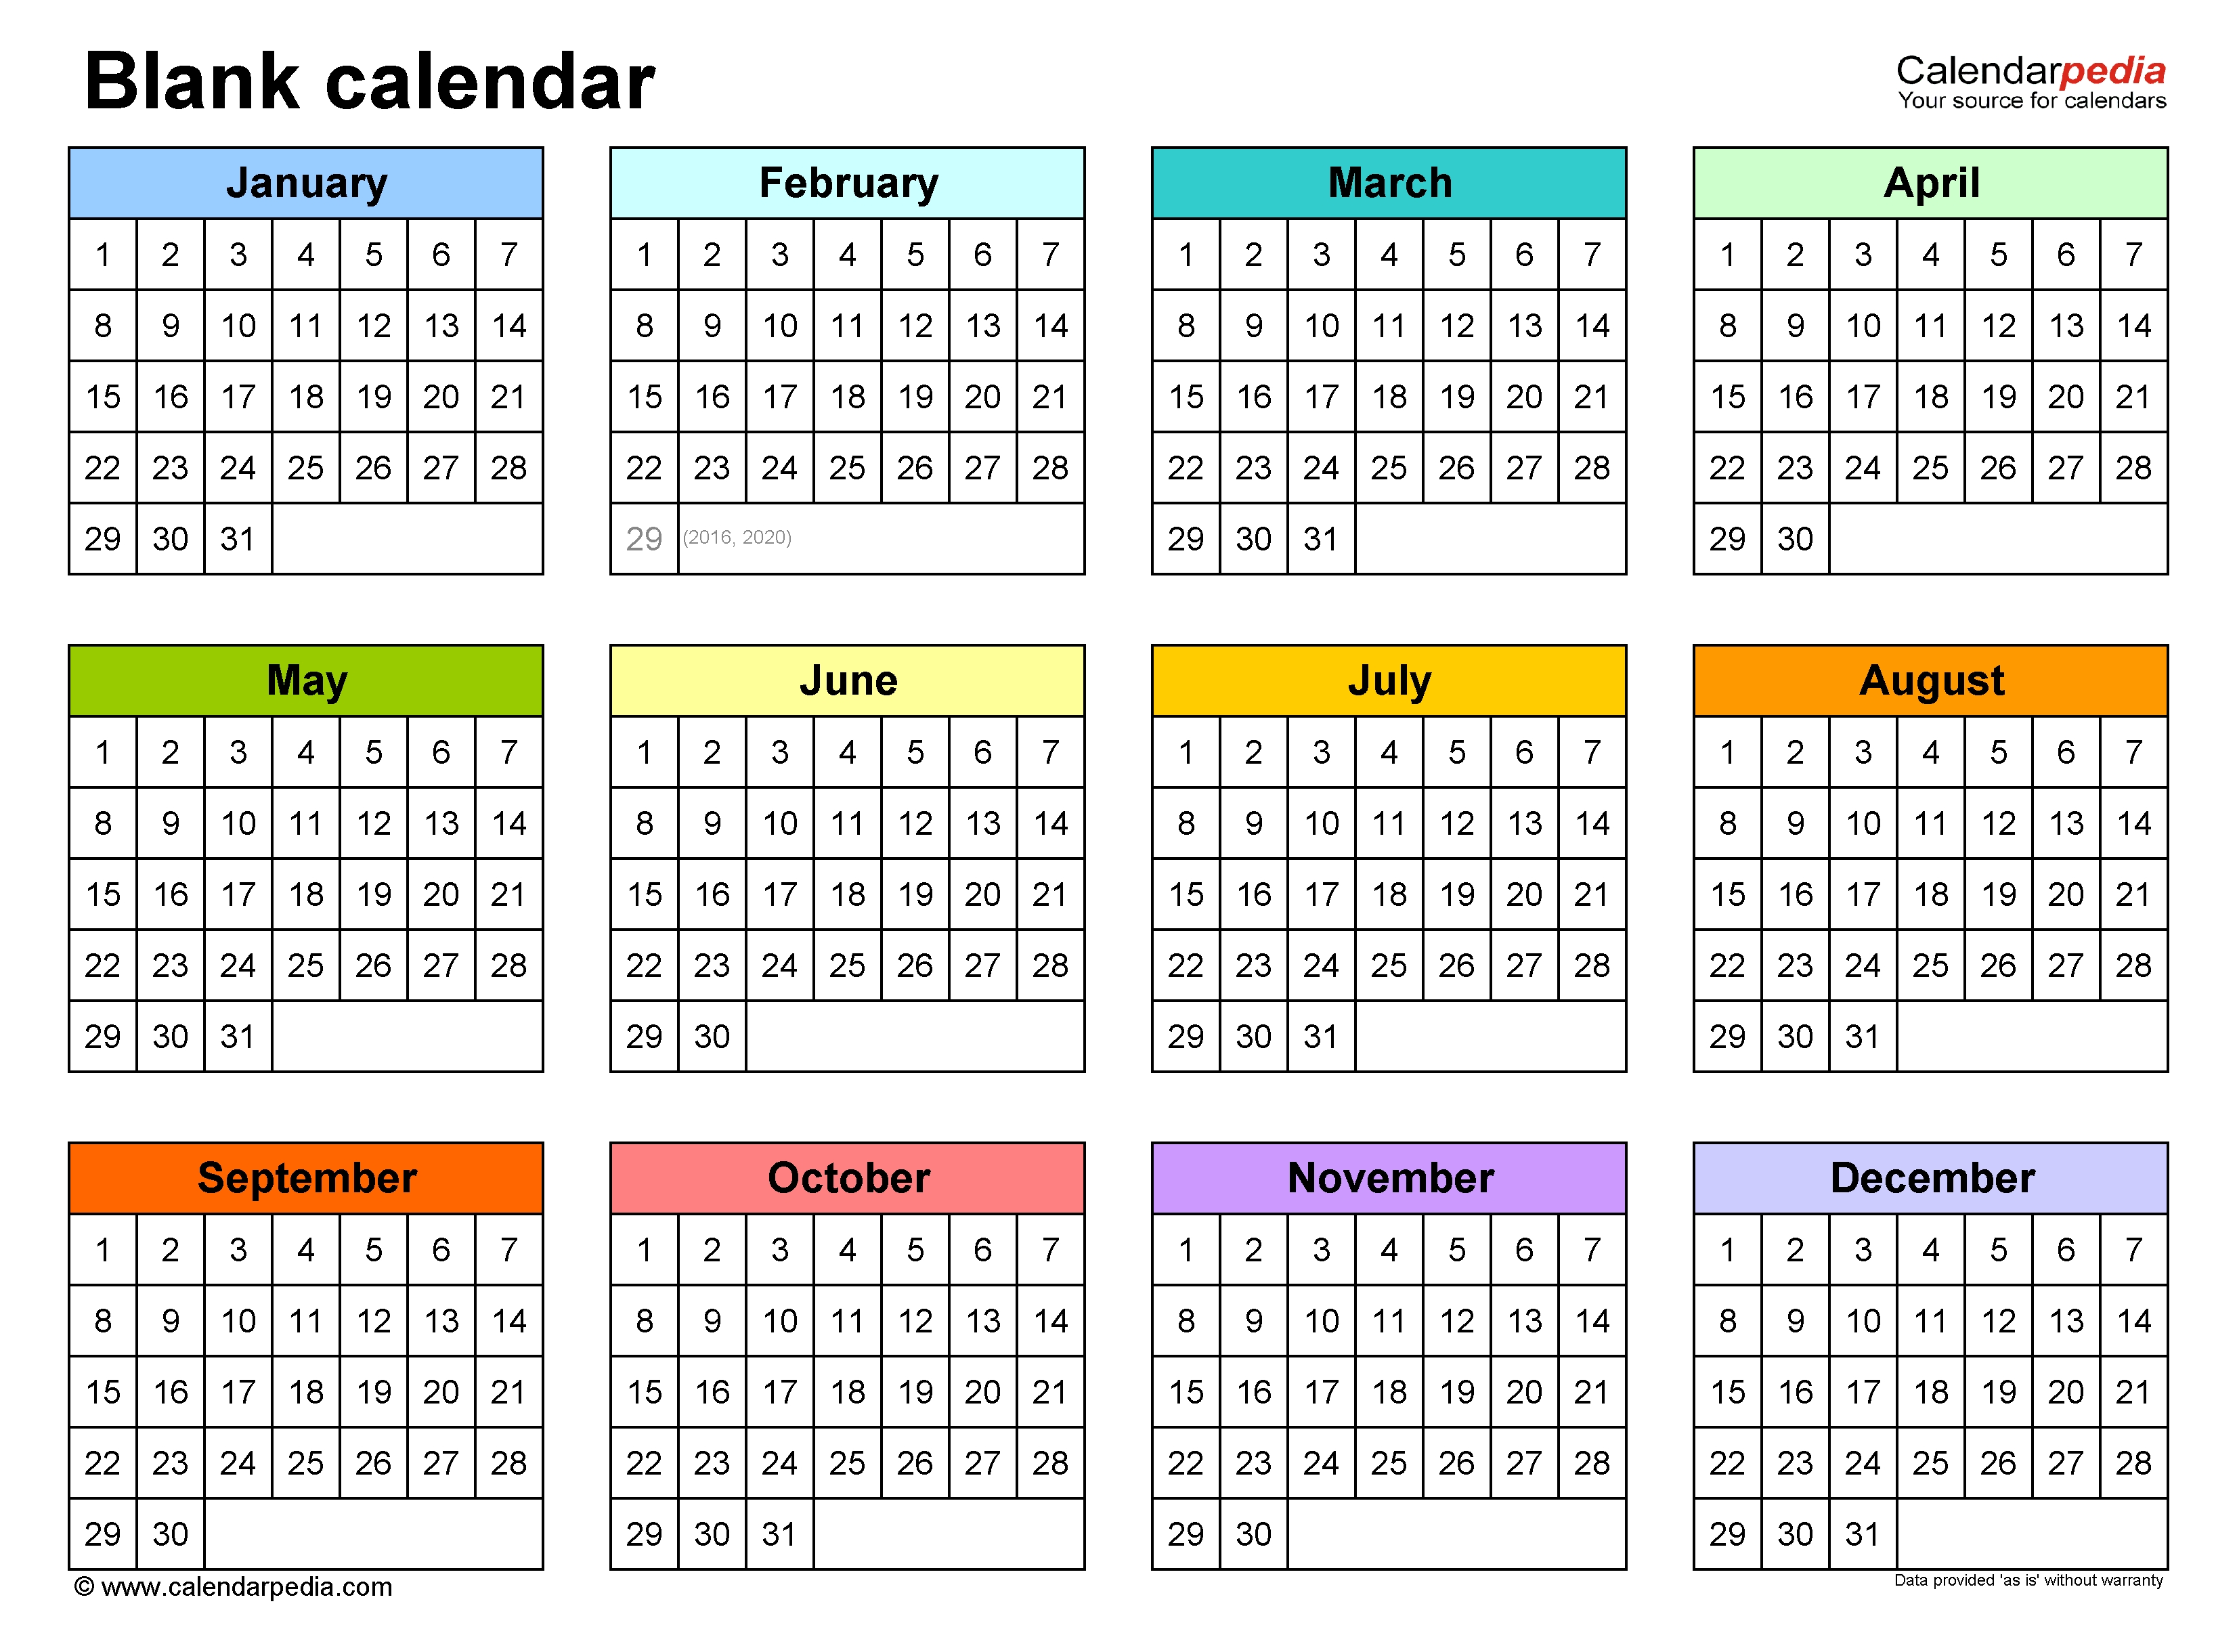 Blank Calendars - Free Printable Microsoft Word Templates Calendar Template Full Year One Page